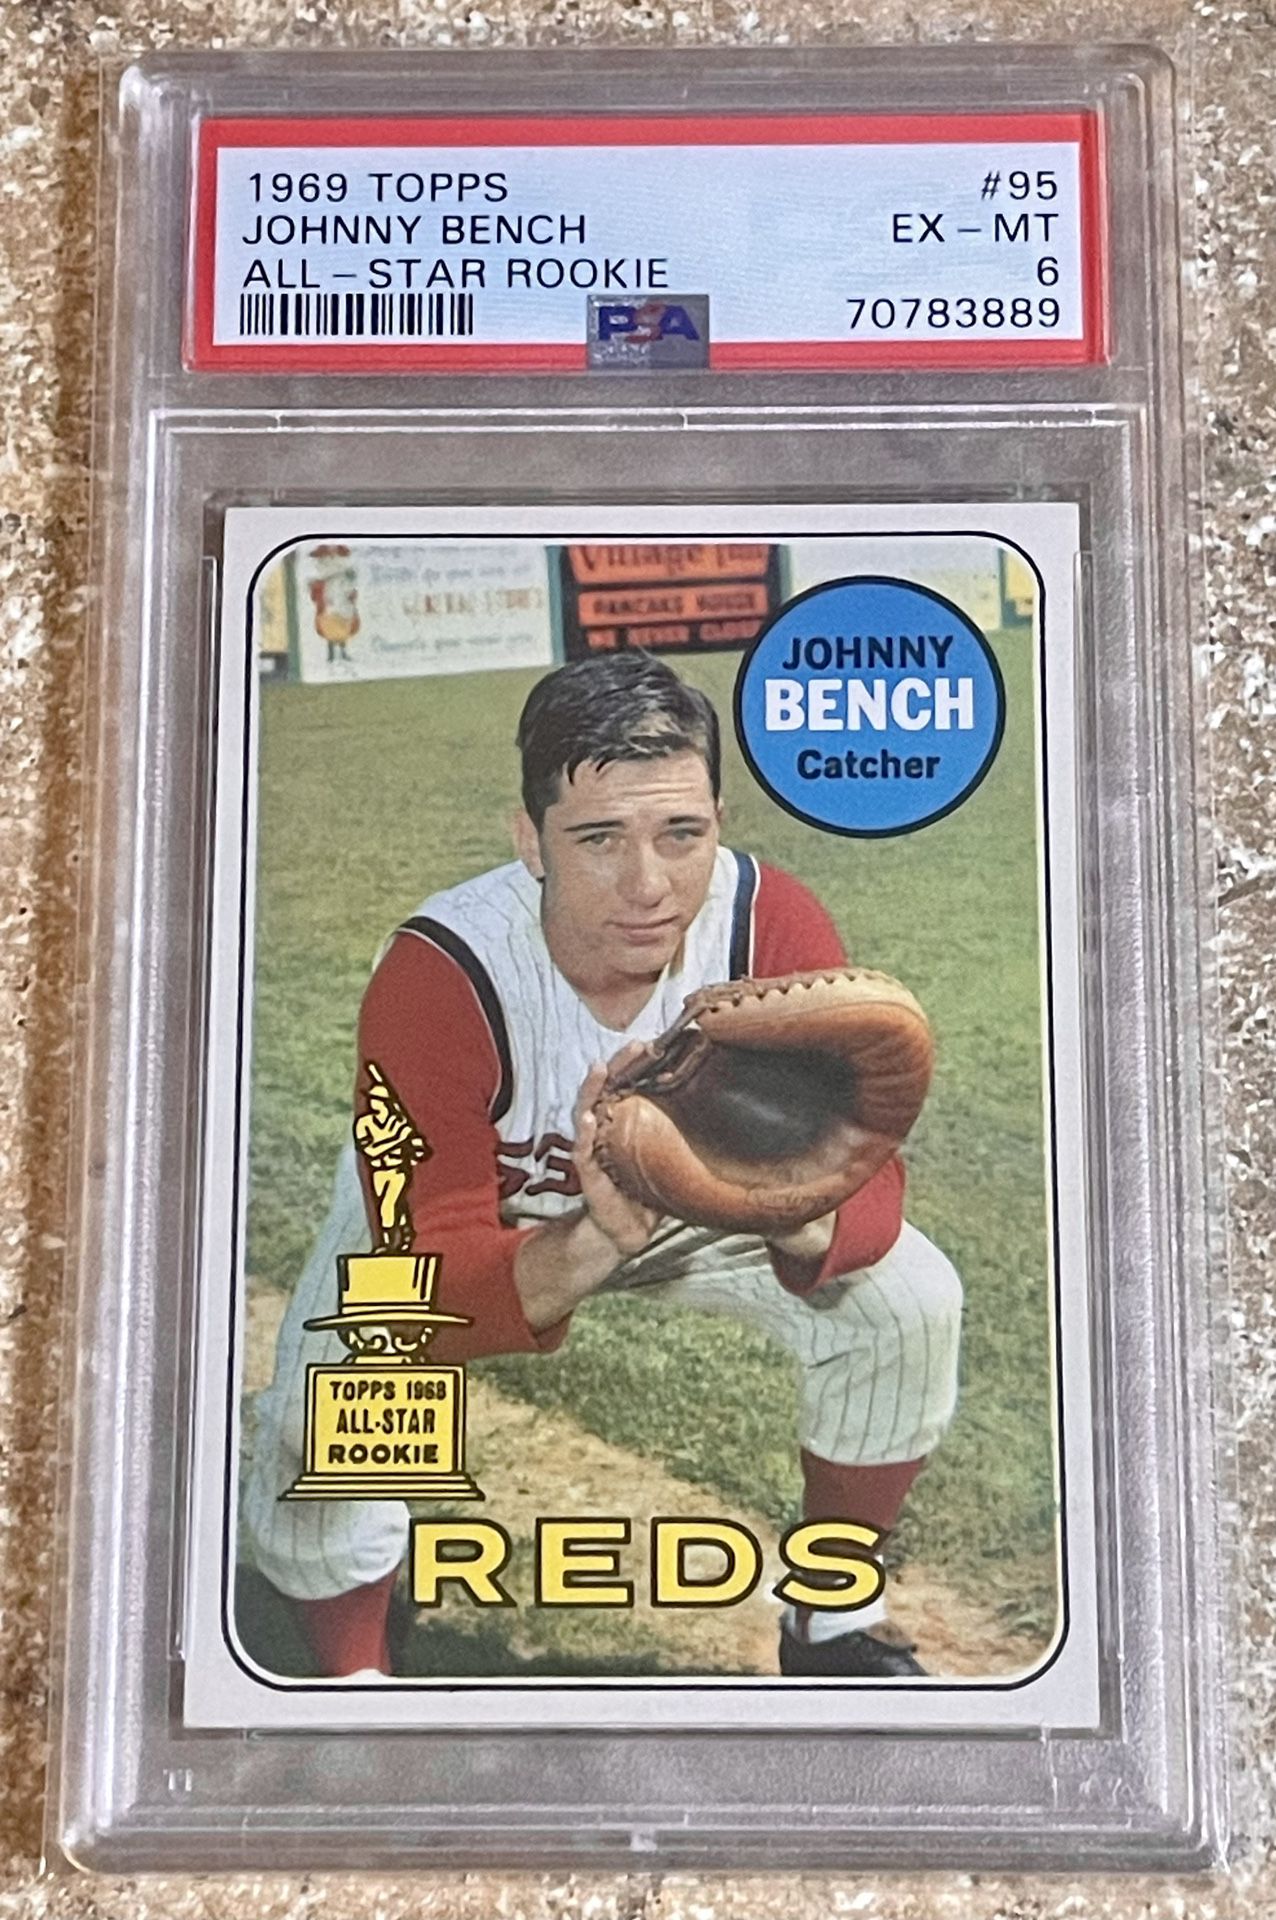 1969 Topps Johnny Bench Rookie Card RC PSA 6 HOF Centered for Sale in  Pasadena, CA - OfferUp